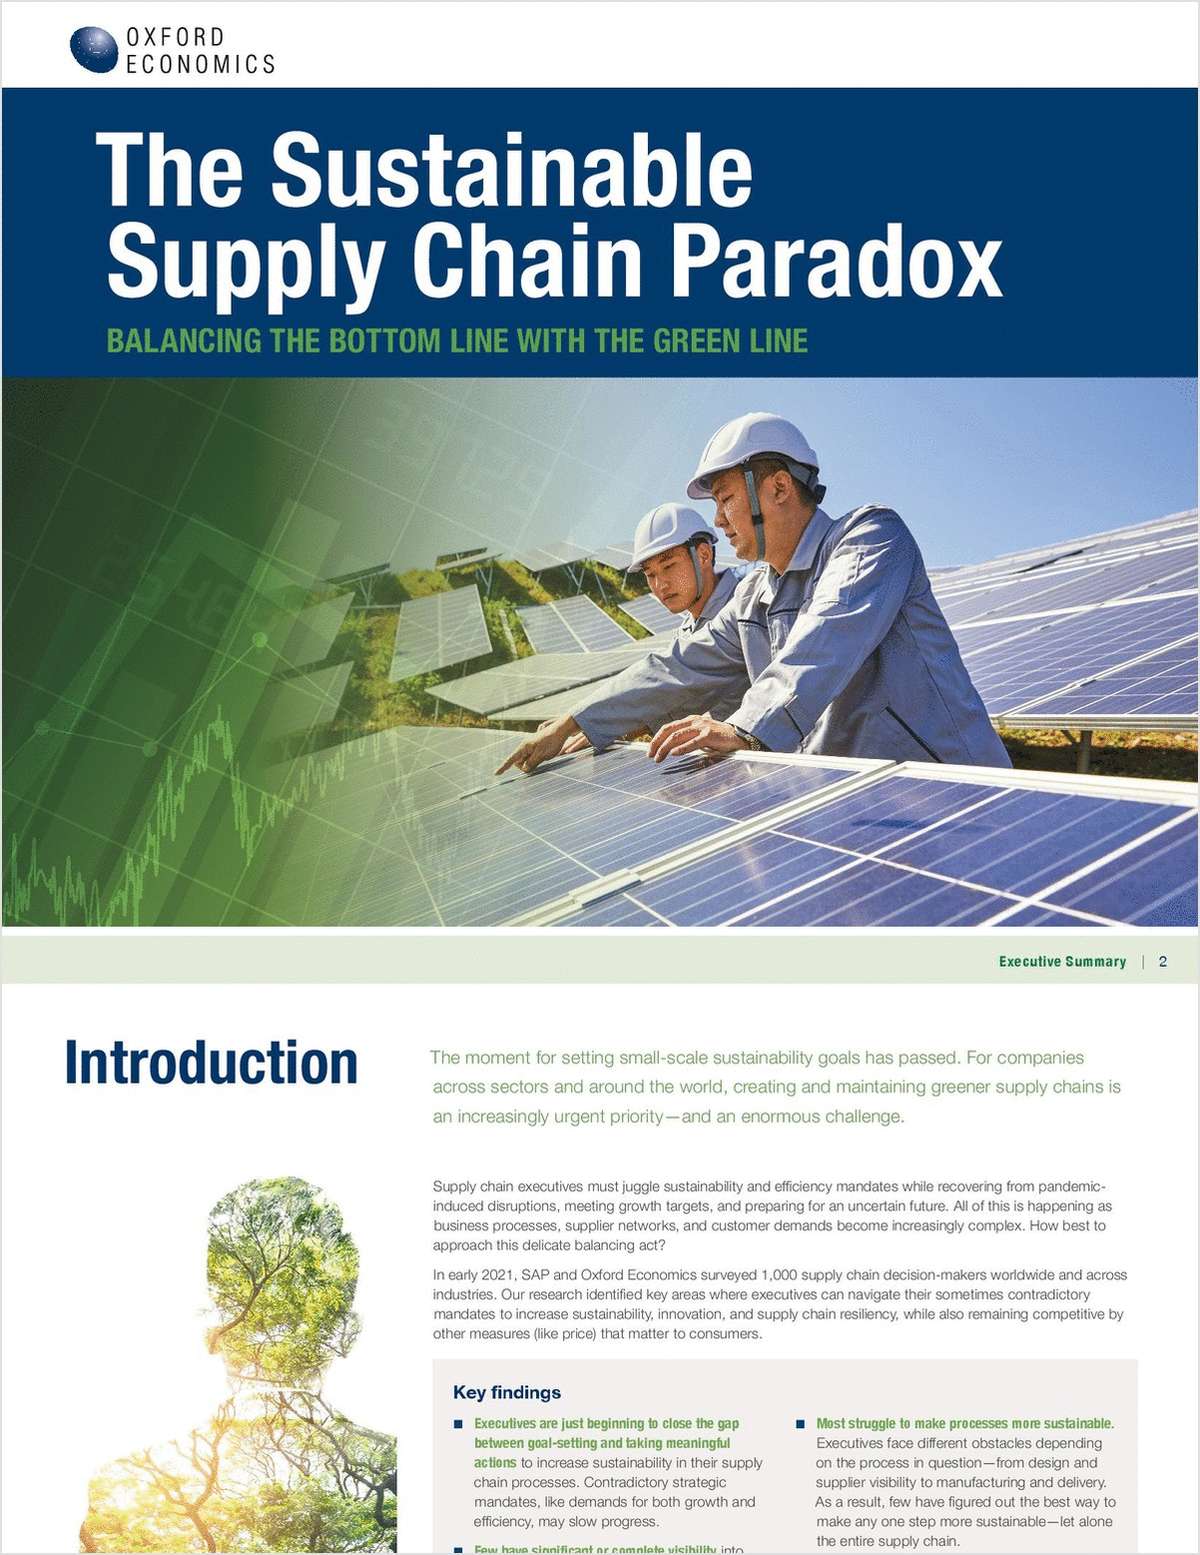 The Sustainable Supply Chain Paradox